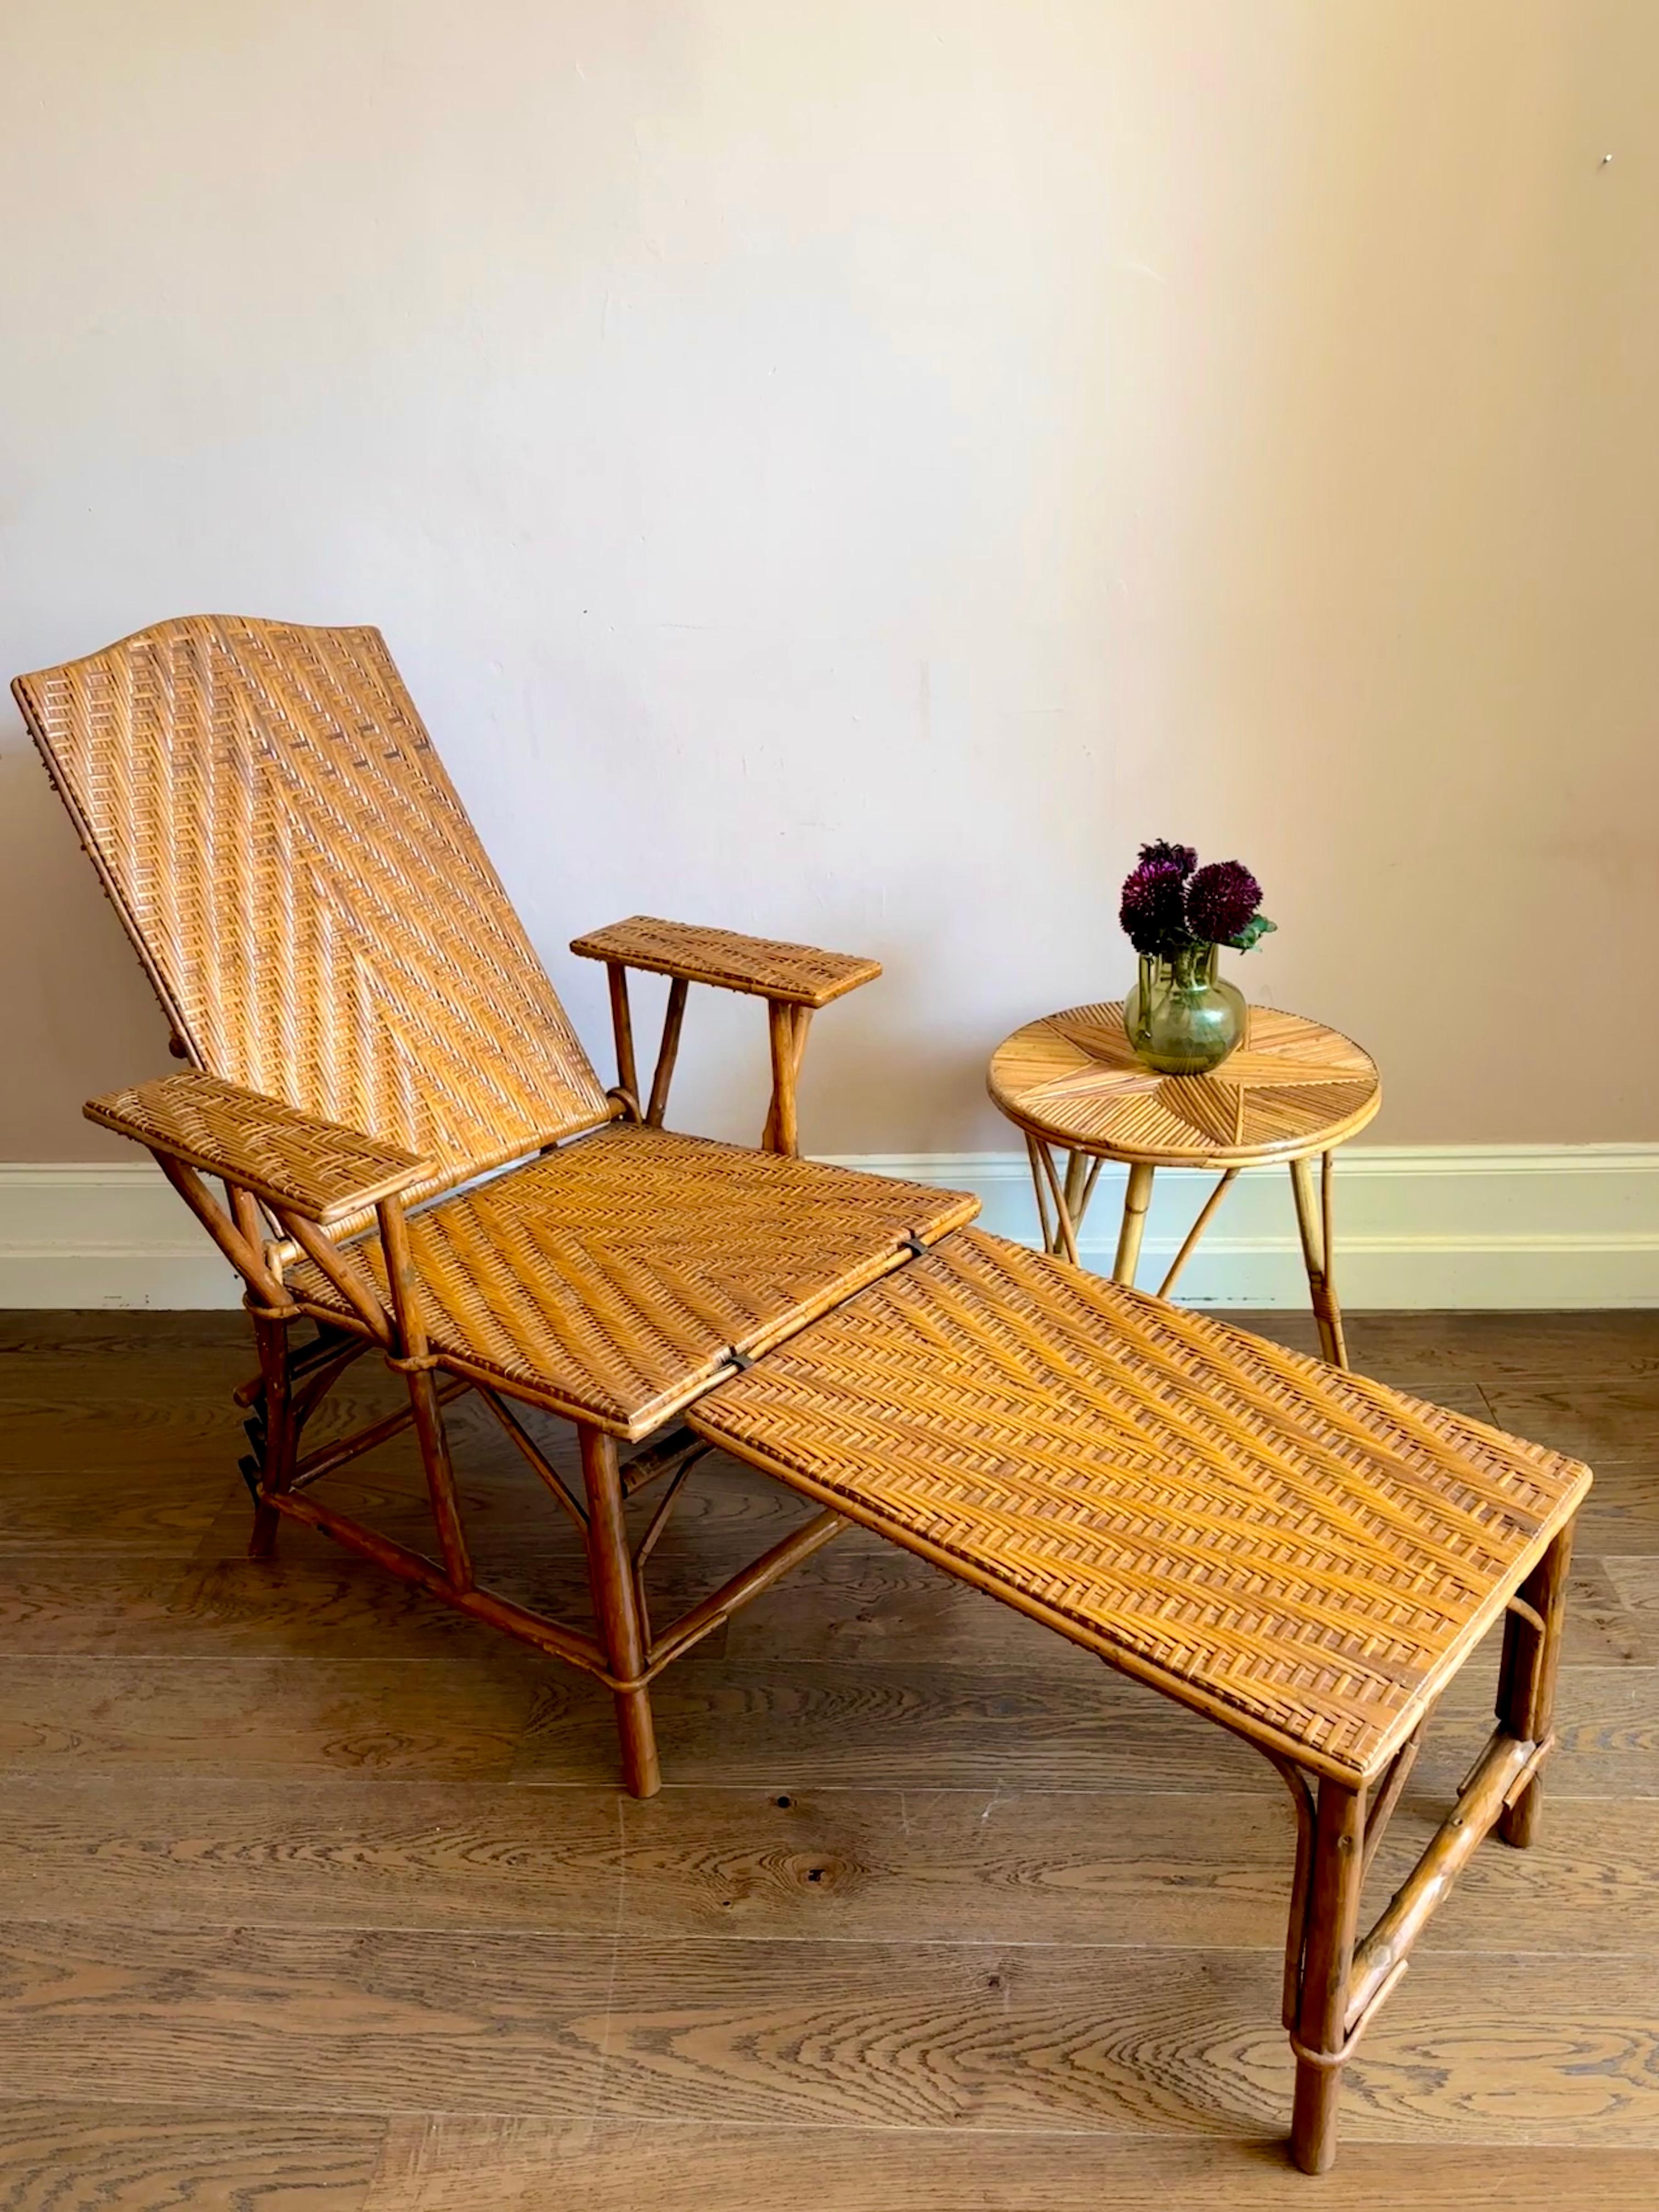 1930s French rattan & wood chaise longue.

Gorgeous sun lounger in woven herringbone pattern with adjustable back and removable ottoman section. In excellent and sturdy condition with very light wear.

Reclined Length 174cm Upright Length 142cm Seat